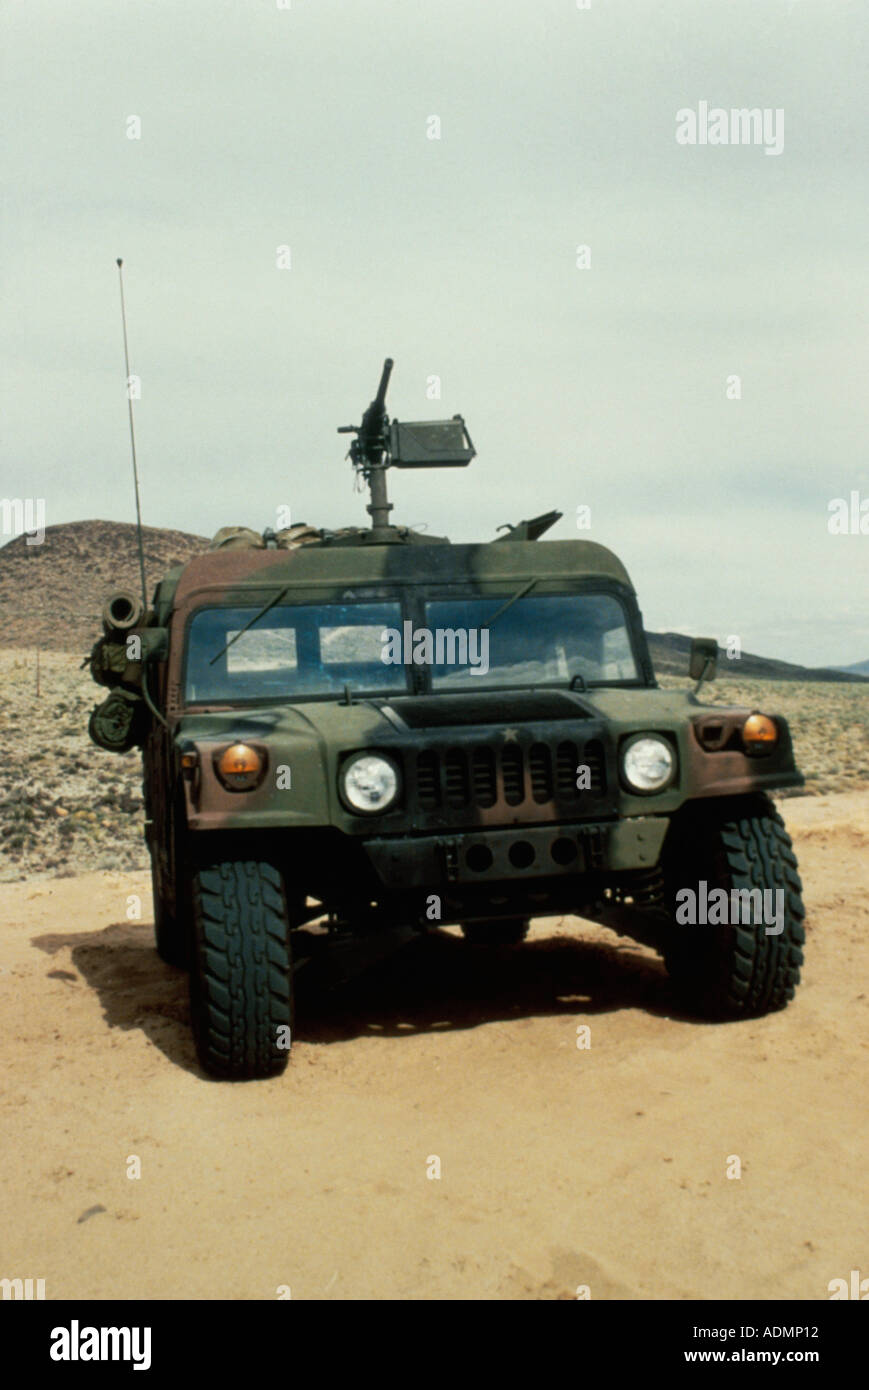 M988 High-Mobility Multipurpose Wheeled Vehicle in the desert Stock Photo